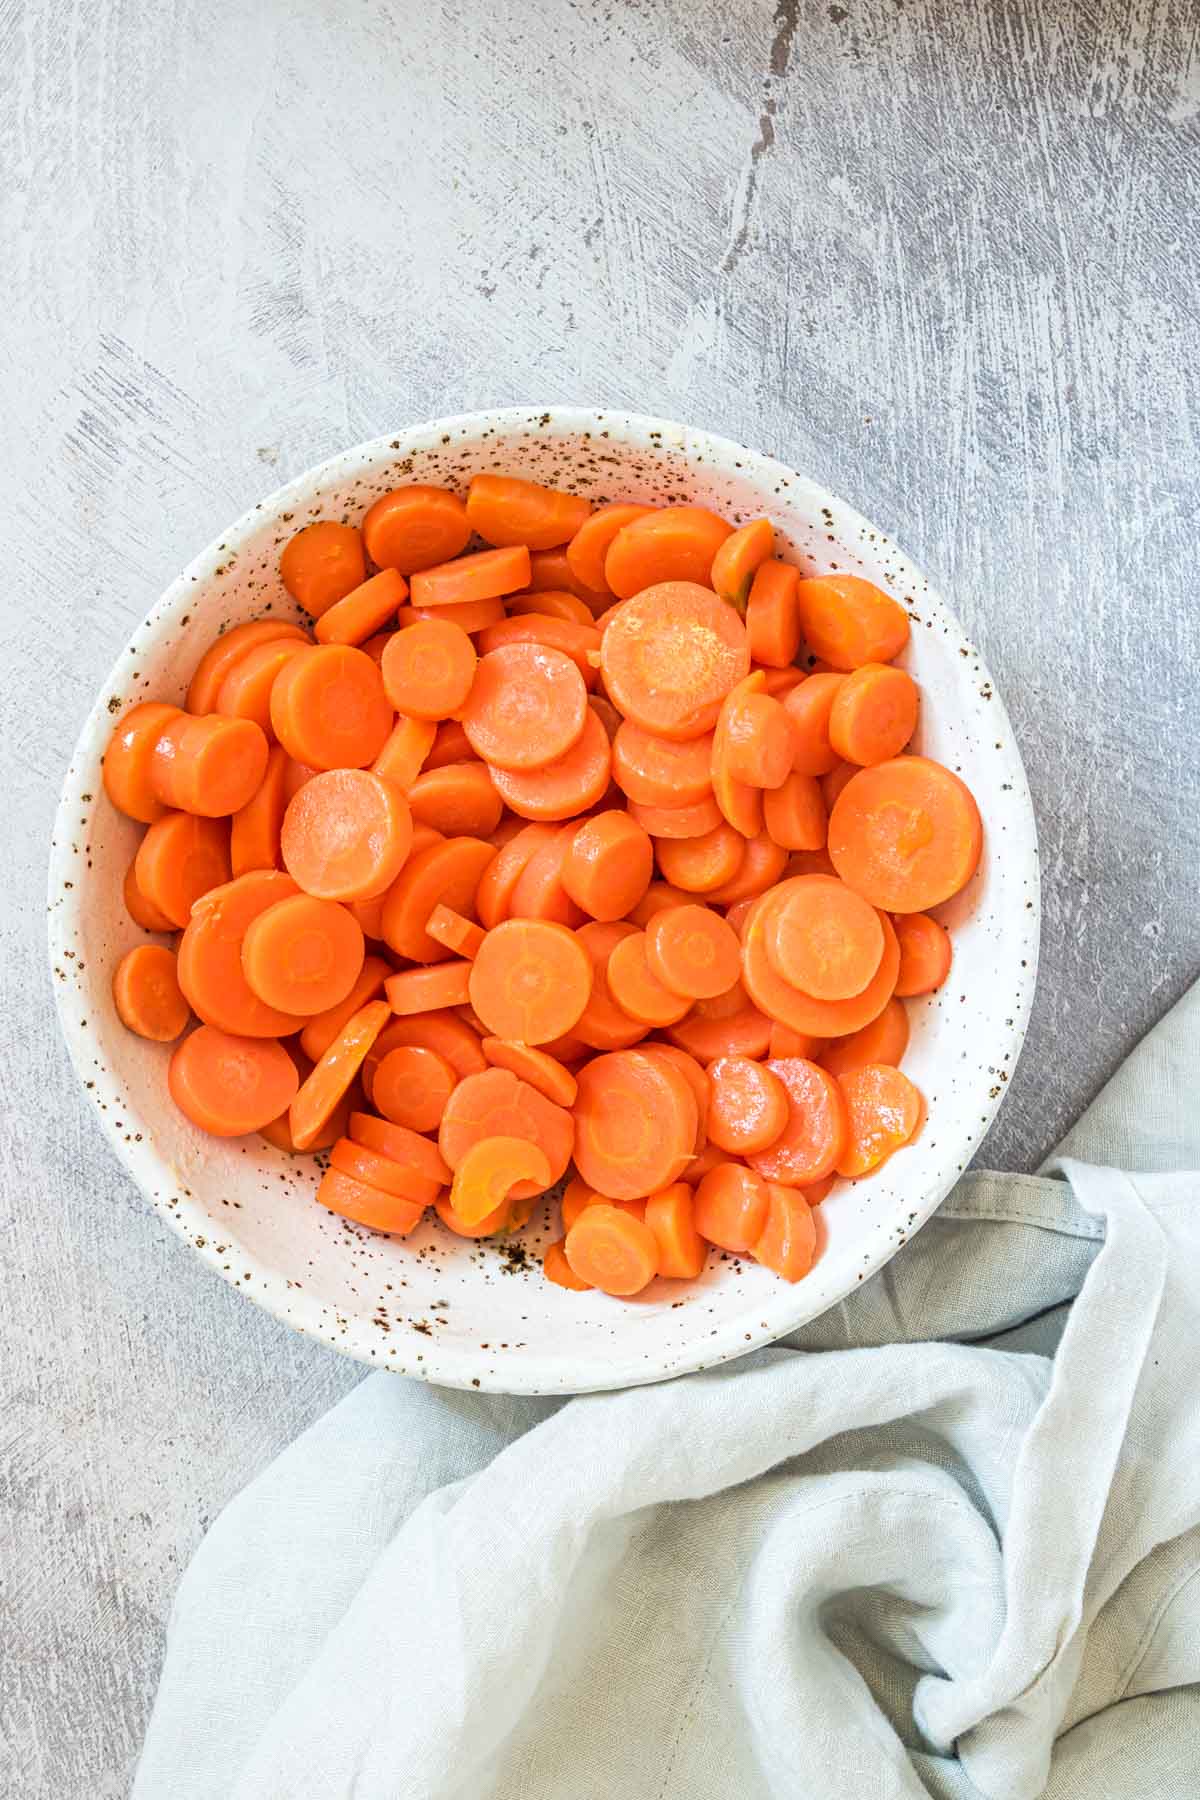 the completed how to boil carrots recipe in a serving dish with cloth napkin